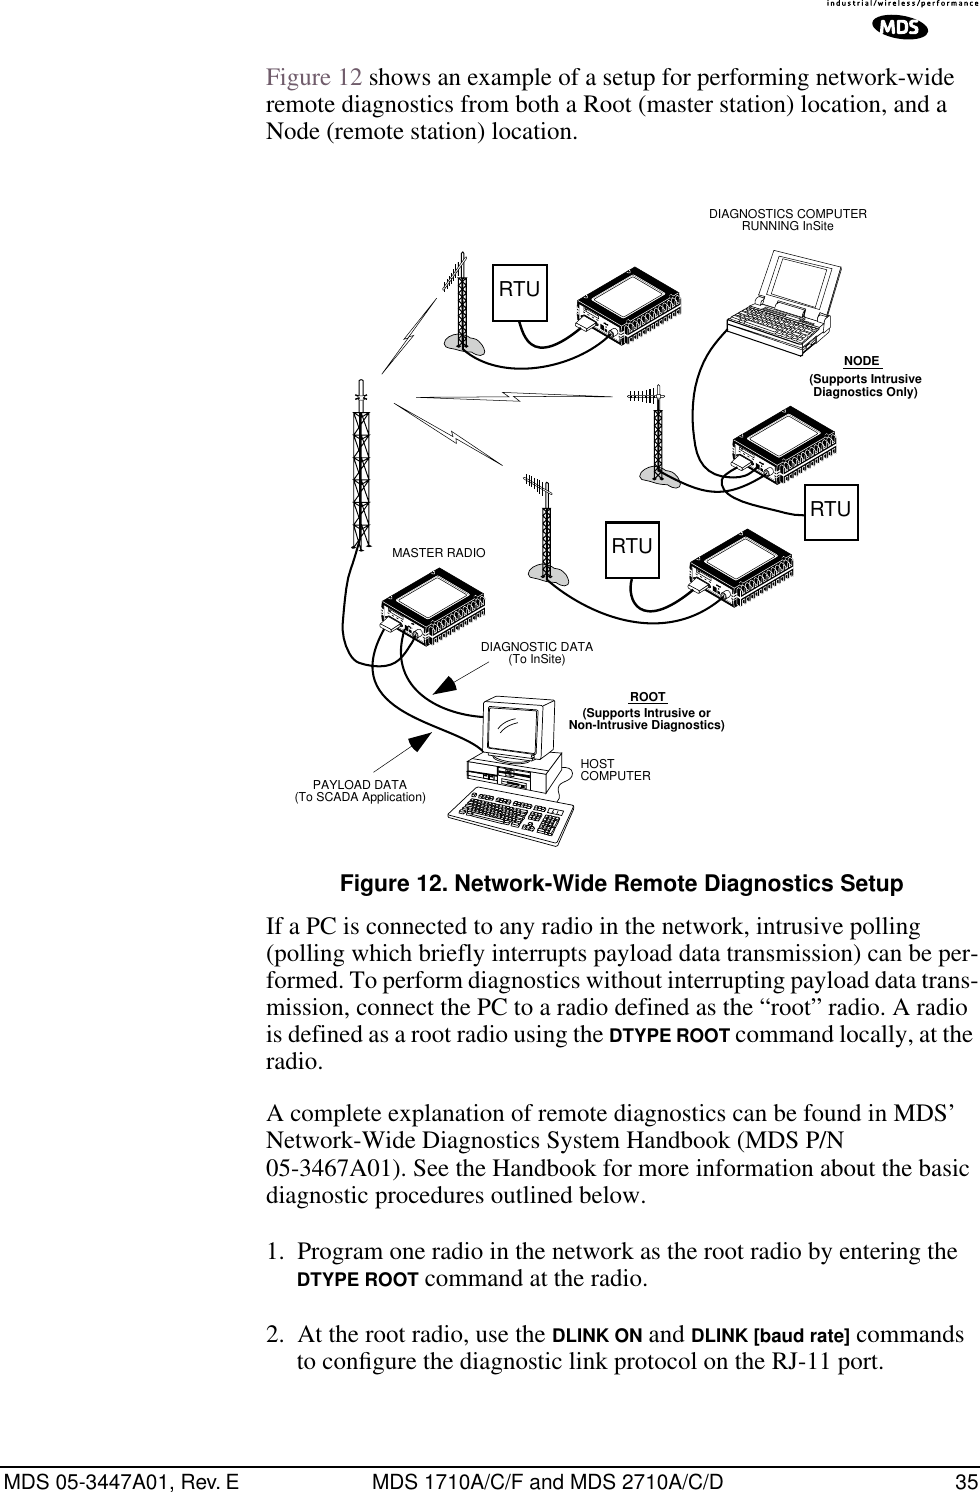 MDS 05-3447A01, Rev. E MDS 1710A/C/F and MDS 2710A/C/D 35Figure 12 shows an example of a setup for performing network-wide remote diagnostics from both a Root (master station) location, and a Node (remote station) location.Invisible place holderFigure 12. Network-Wide Remote Diagnostics SetupIf a PC is connected to any radio in the network, intrusive polling (polling which briefly interrupts payload data transmission) can be per-formed. To perform diagnostics without interrupting payload data trans-mission, connect the PC to a radio defined as the “root” radio. A radio is defined as a root radio using the DTYPE ROOT command locally, at the radio.A complete explanation of remote diagnostics can be found in MDS’ Network-Wide Diagnostics System Handbook (MDS P/N 05-3467A01). See the Handbook for more information about the basic diagnostic procedures outlined below.1. Program one radio in the network as the root radio by entering the DTYPE ROOT command at the radio.2. At the root radio, use the DLINK ON and DLINK [baud rate] commands to conﬁgure the diagnostic link protocol on the RJ-11 port.RTURTURTUMASTER RADIODIAGNOSTICS COMPUTERRUNNING InSitePAYLOAD DATA(To SCADA Application)DIAGNOSTIC DATA(To InSite)HOSTCOMPUTERNODE(Supports IntrusiveDiagnostics Only)ROOT(Supports Intrusive orNon-Intrusive Diagnostics)